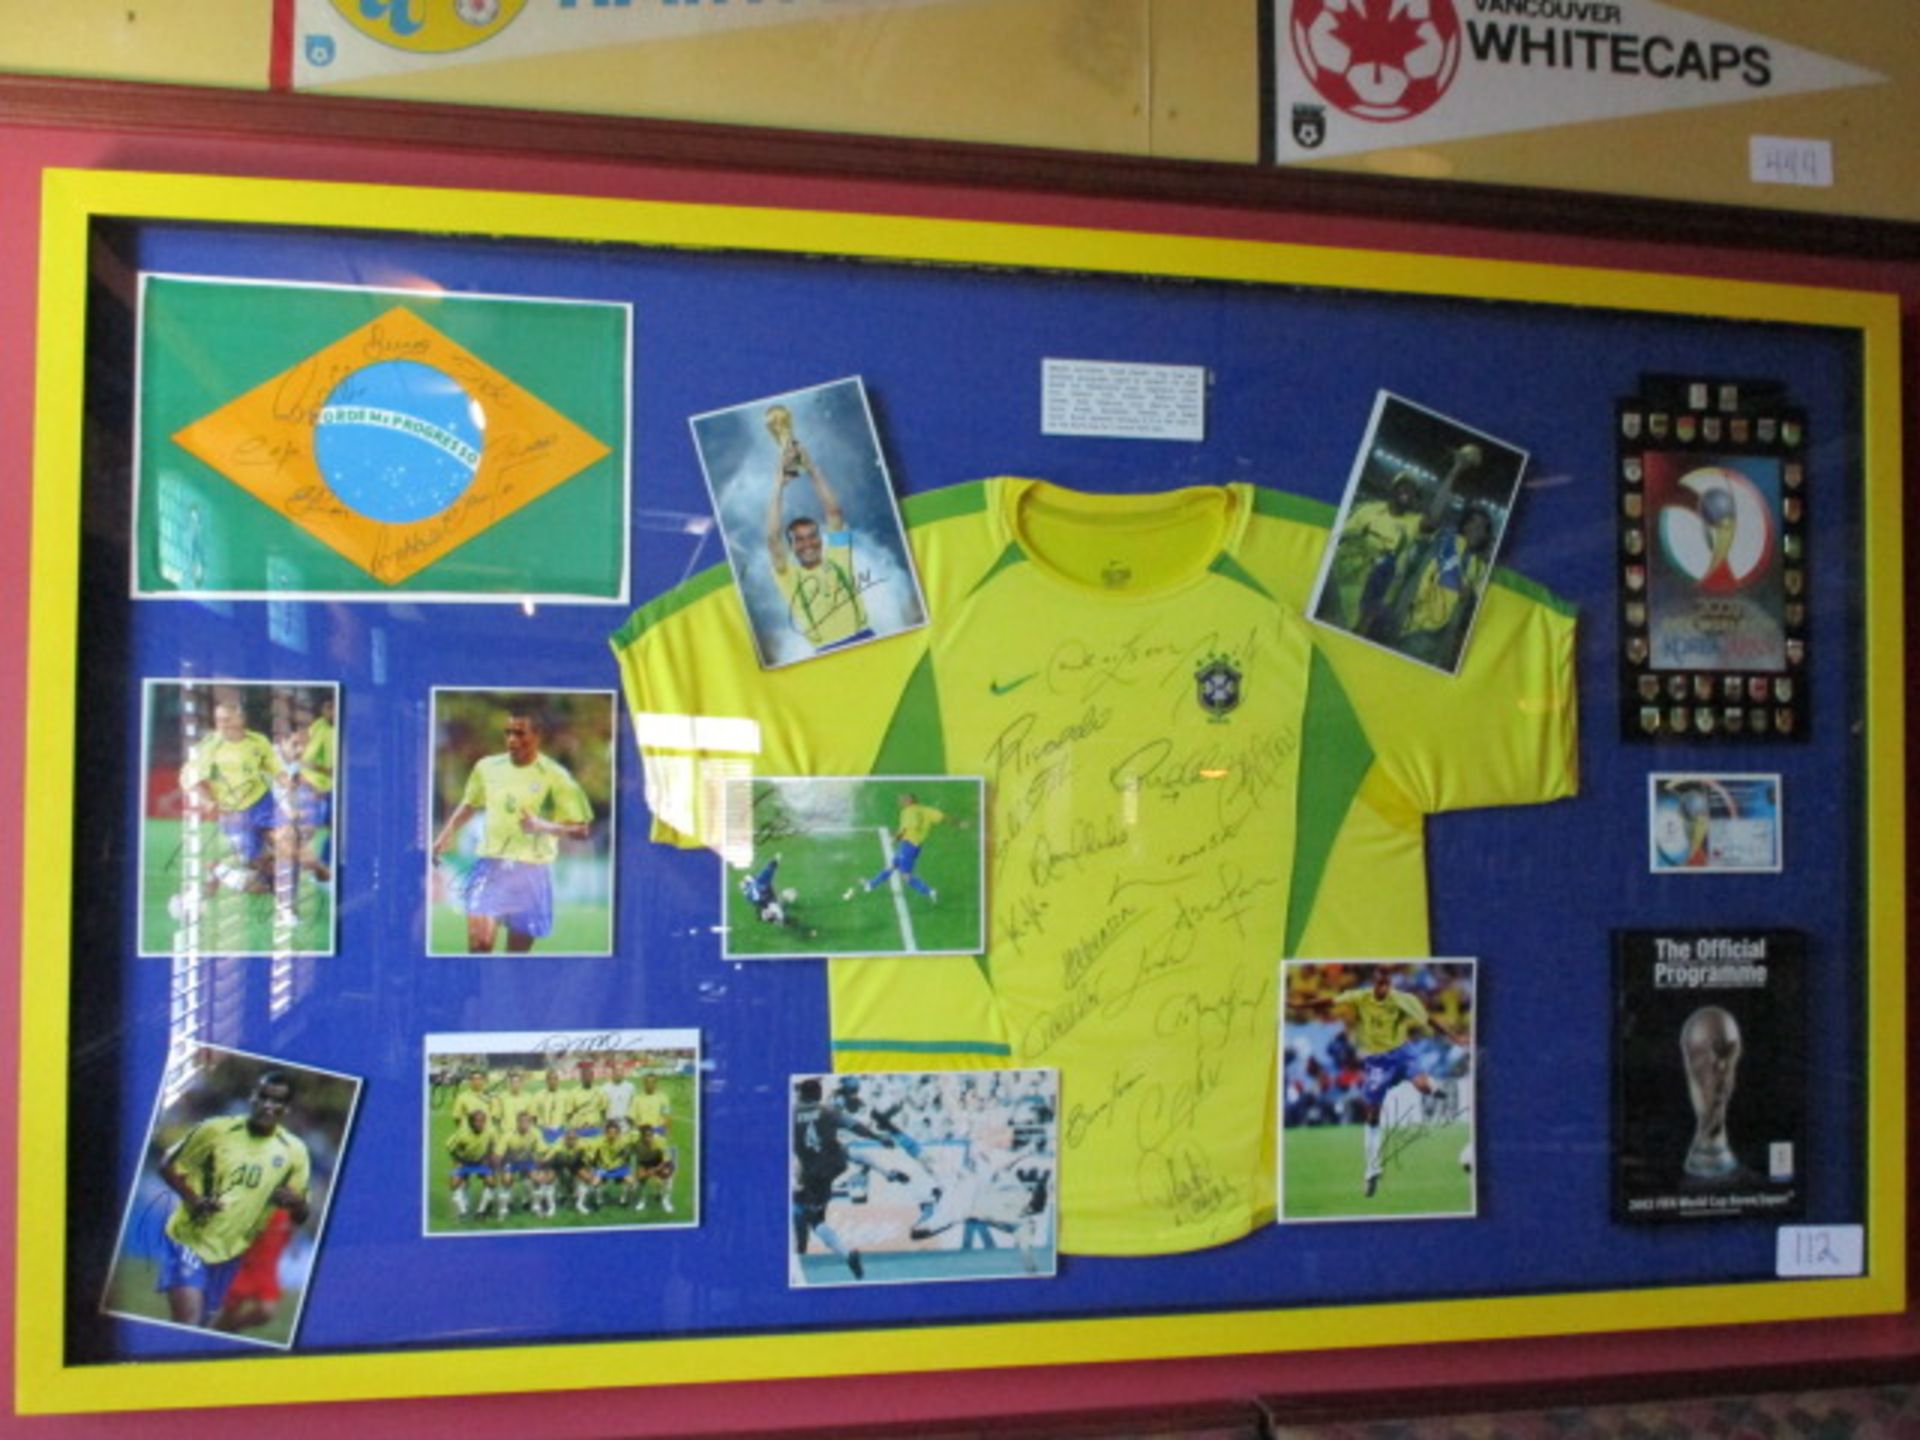 Brazil National team shirt, flag, team and individual photos signed by members of the 2002 World Cup